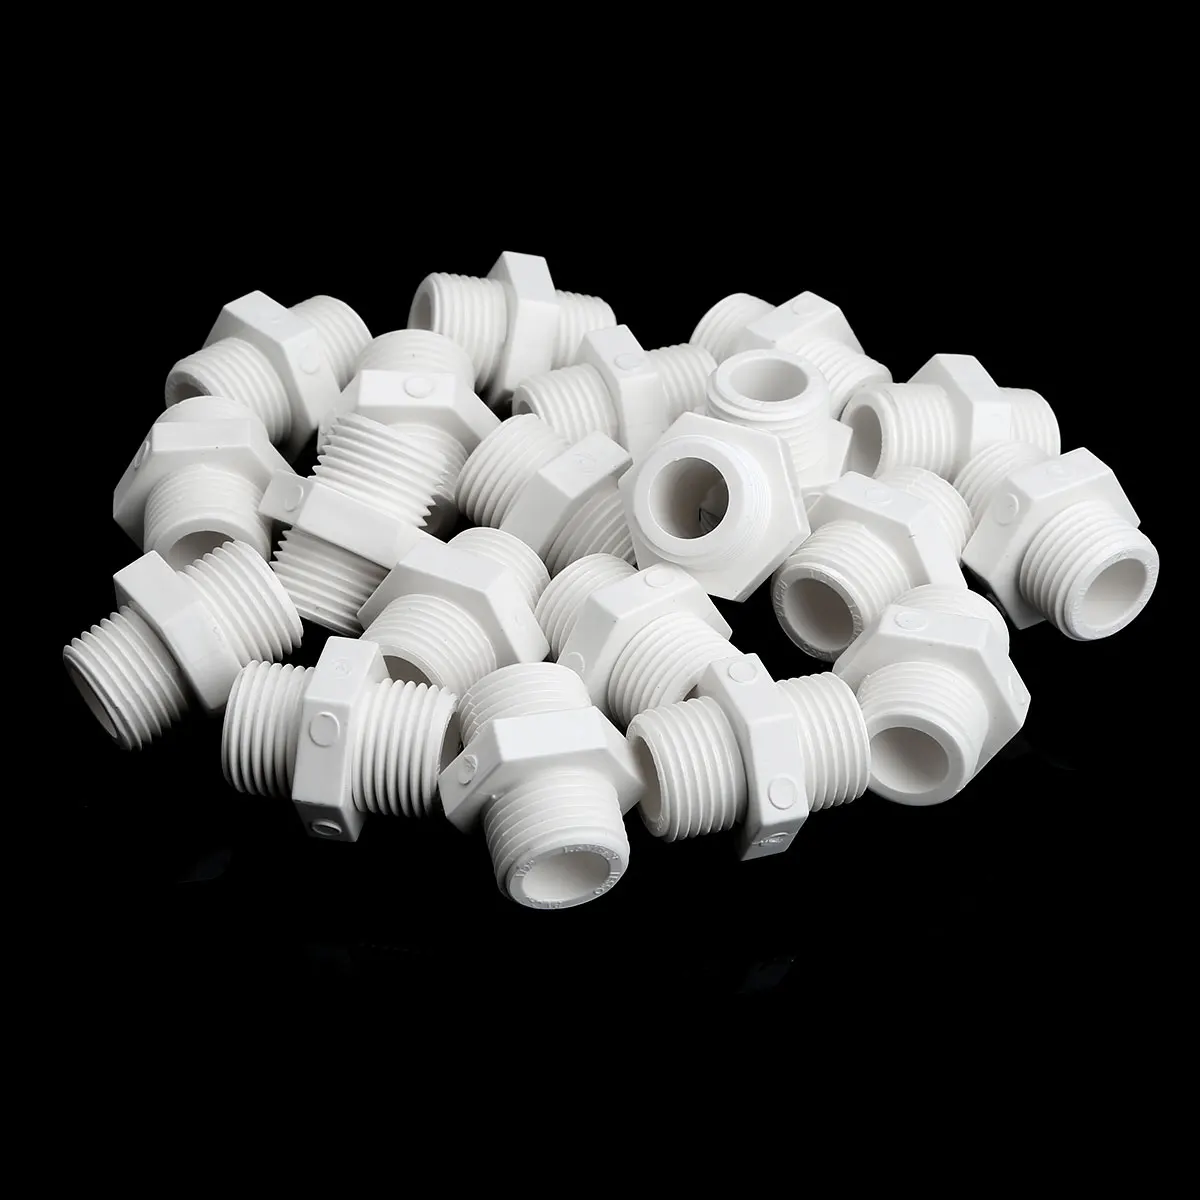 Details about   20 Pcs 1/2 Inch PVC Drain Plug NPT Replacement for RV Camper Atwood Water Heater 